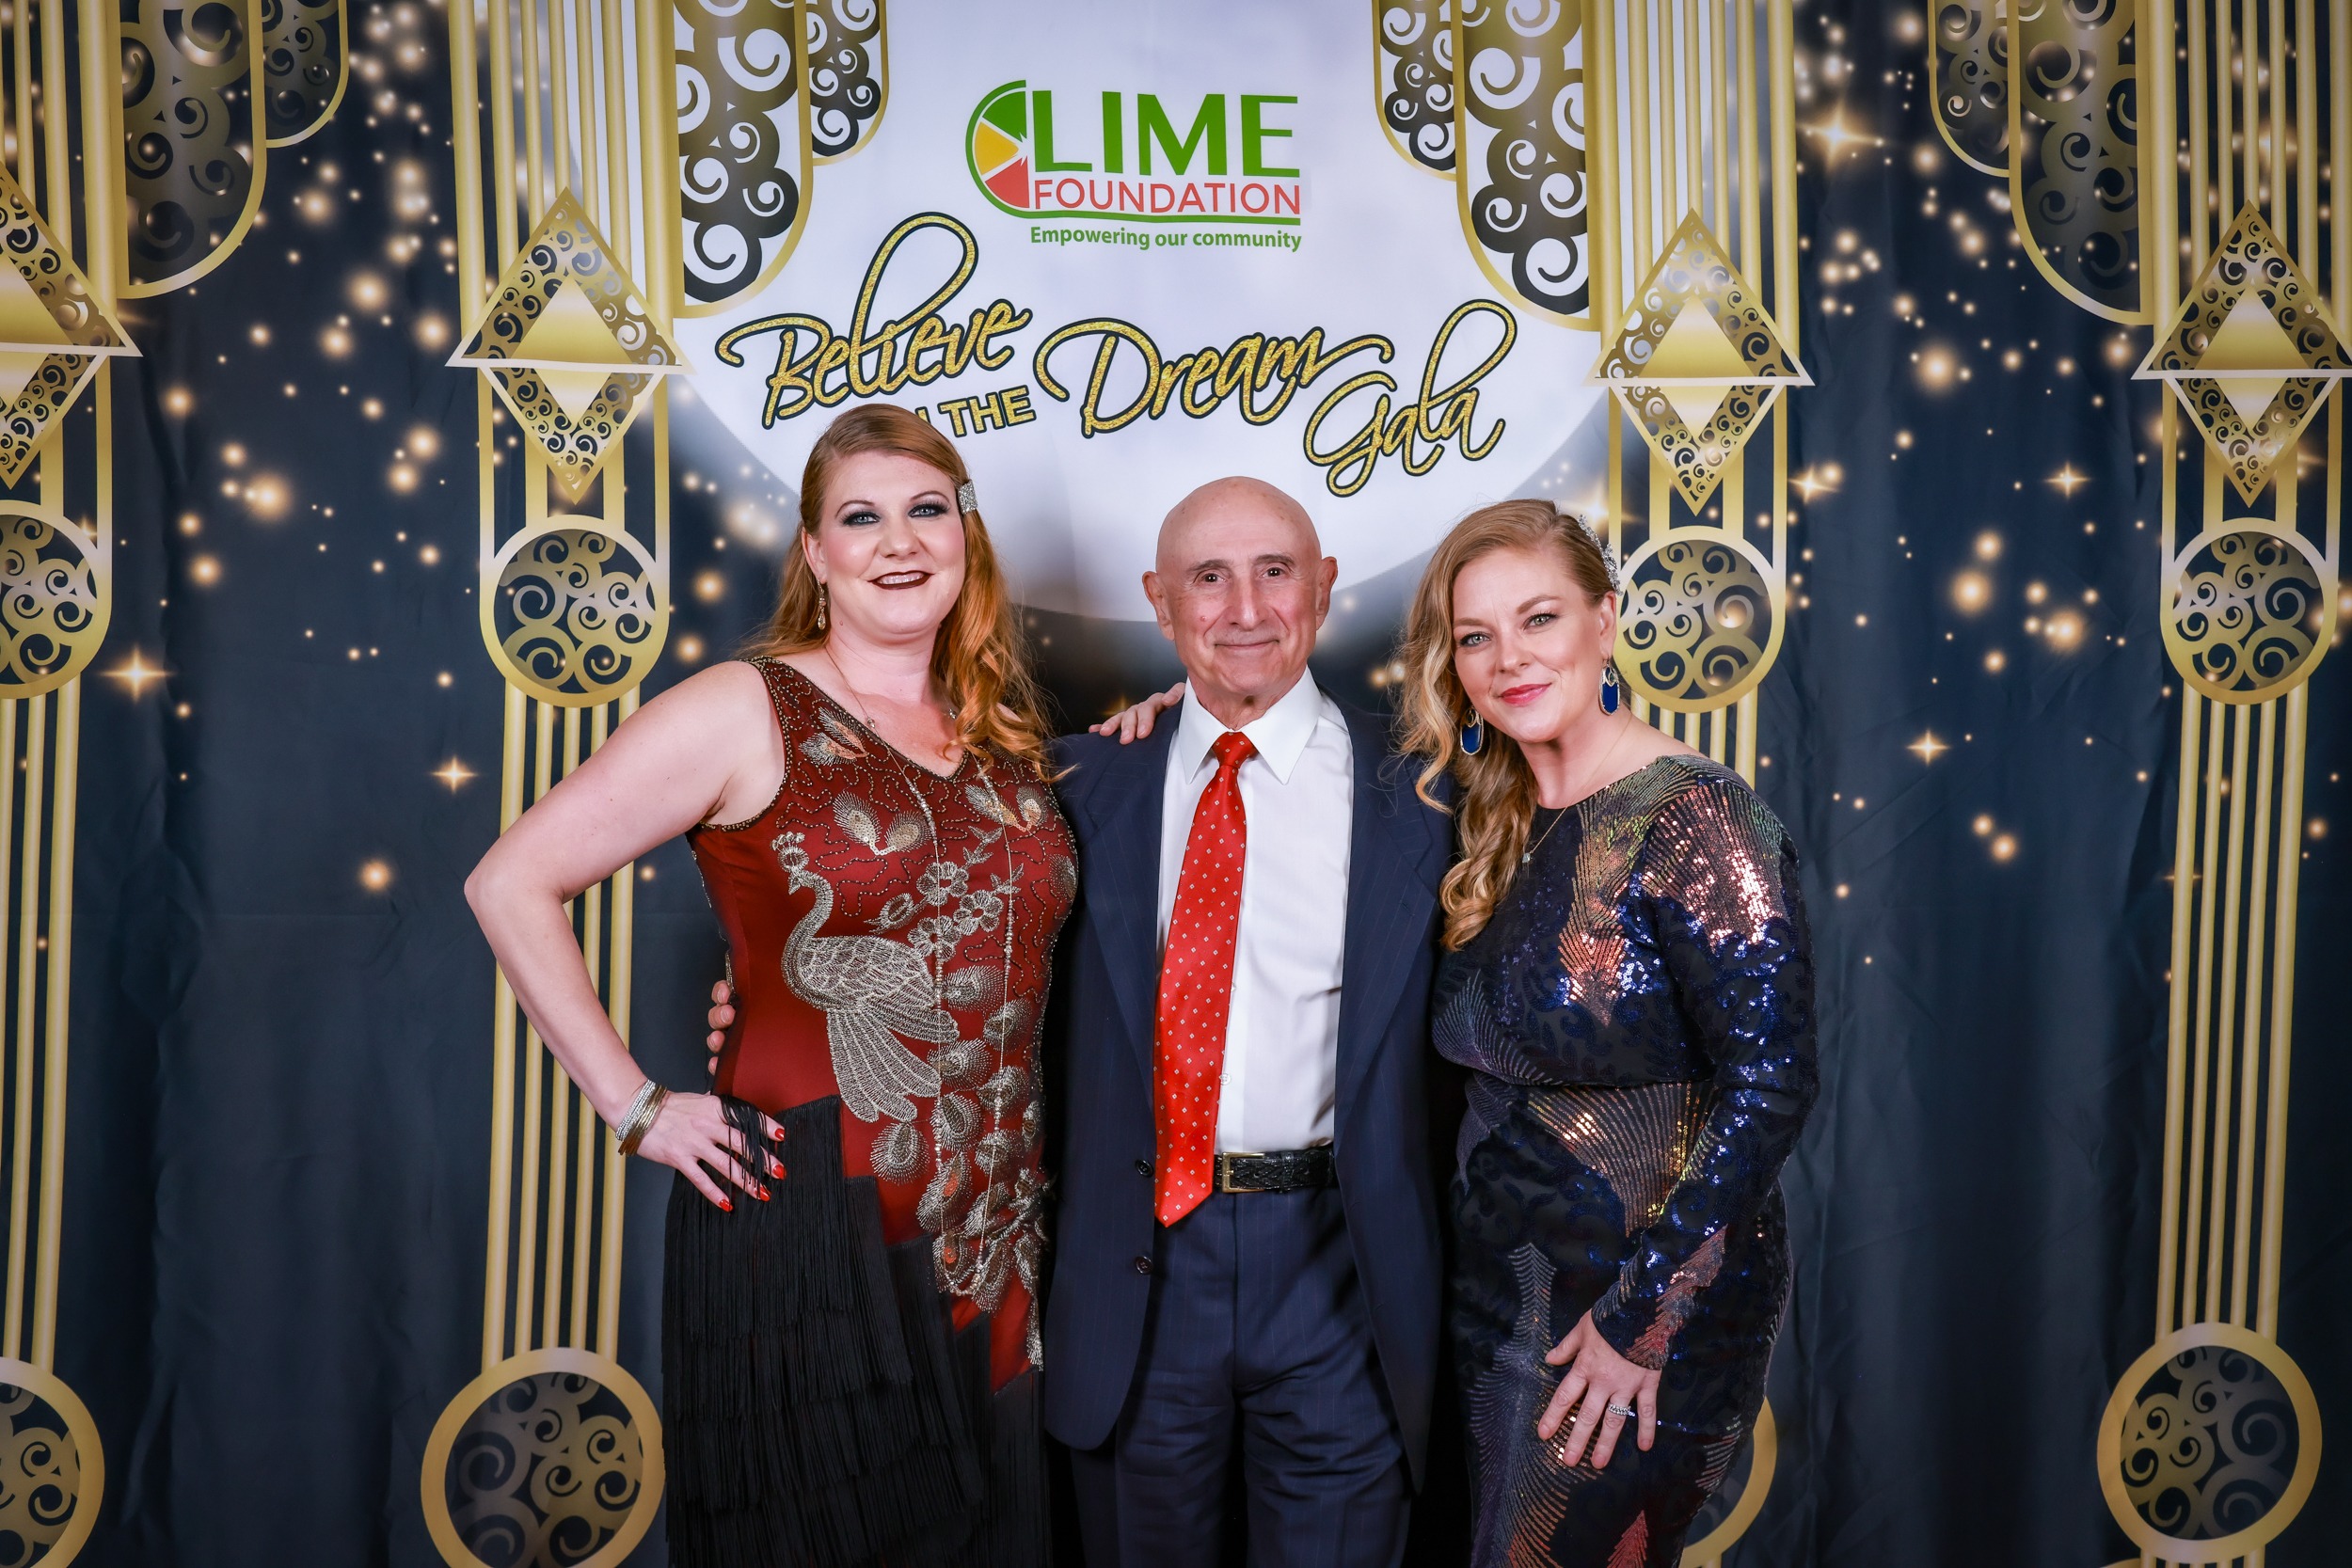 Three individuals posing for a photo at a party hosted by The LIME Foundation of Santa Rosa.